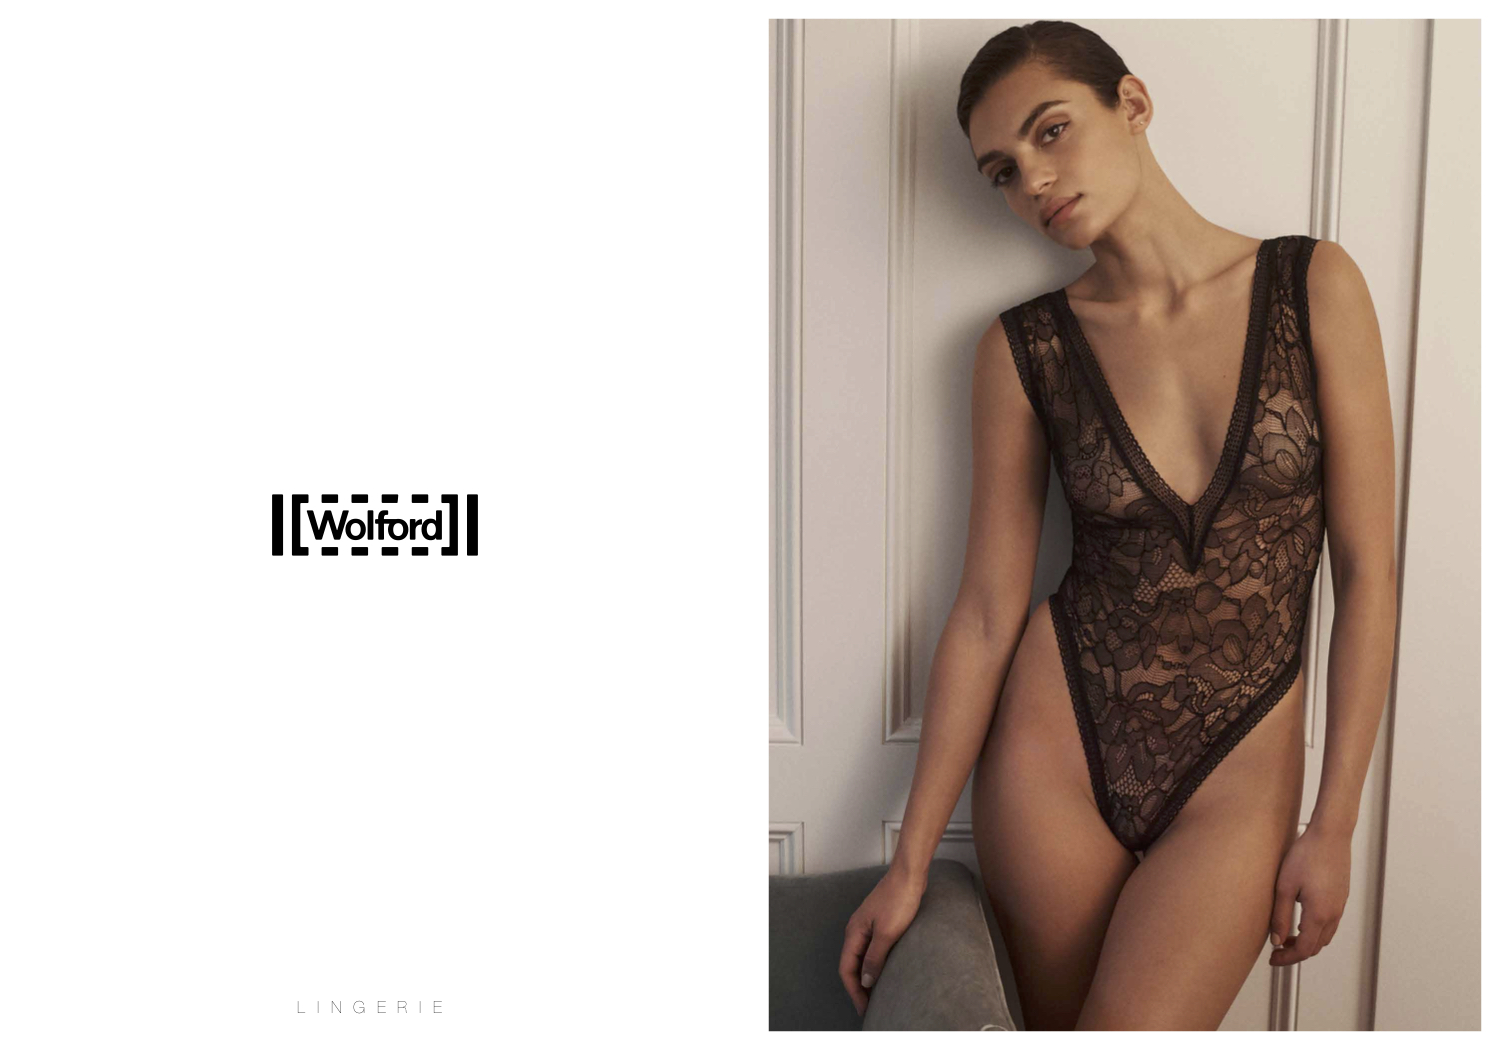 Delta Galil inks and swimwear deal with Wolford